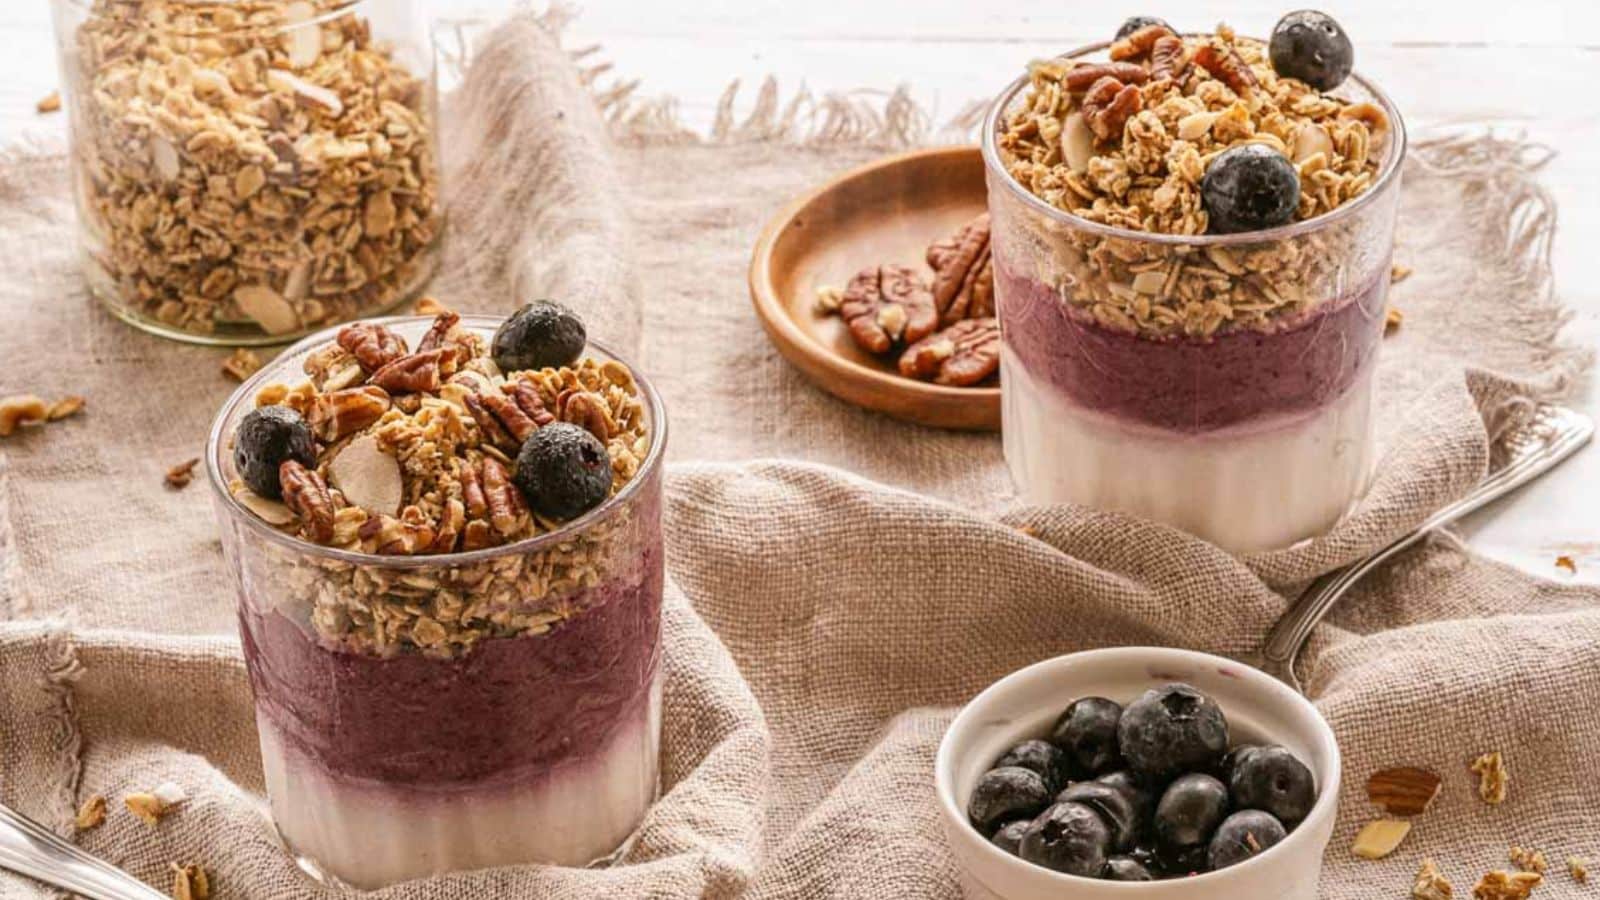 <p>Start your morning with a parfait that’s as easy to make as it is delicious. Layer creamy yogurt with crunchy granola and a drizzle of honey for a satisfying breakfast. It’s a treat for the taste buds and packs a nutritional punch to keep you going. <br><strong>Get the Recipe: </strong><a href="https://twocityvegans.com/vegan-breakfast-parfait/?utm_source=msn&utm_medium=page&utm_campaign=msn" rel="noopener">Breakfast Parfait with Yogurt & Granola</a></p>